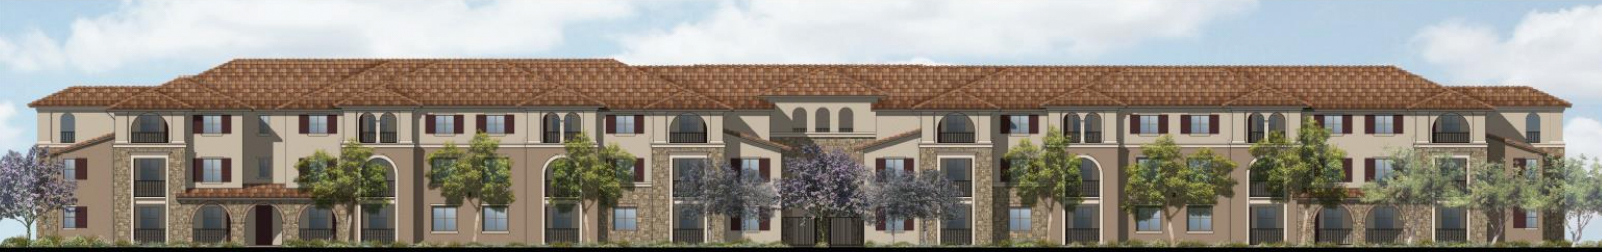 1692 Sycamore Drive. Rendering via City of Simi Valley. 